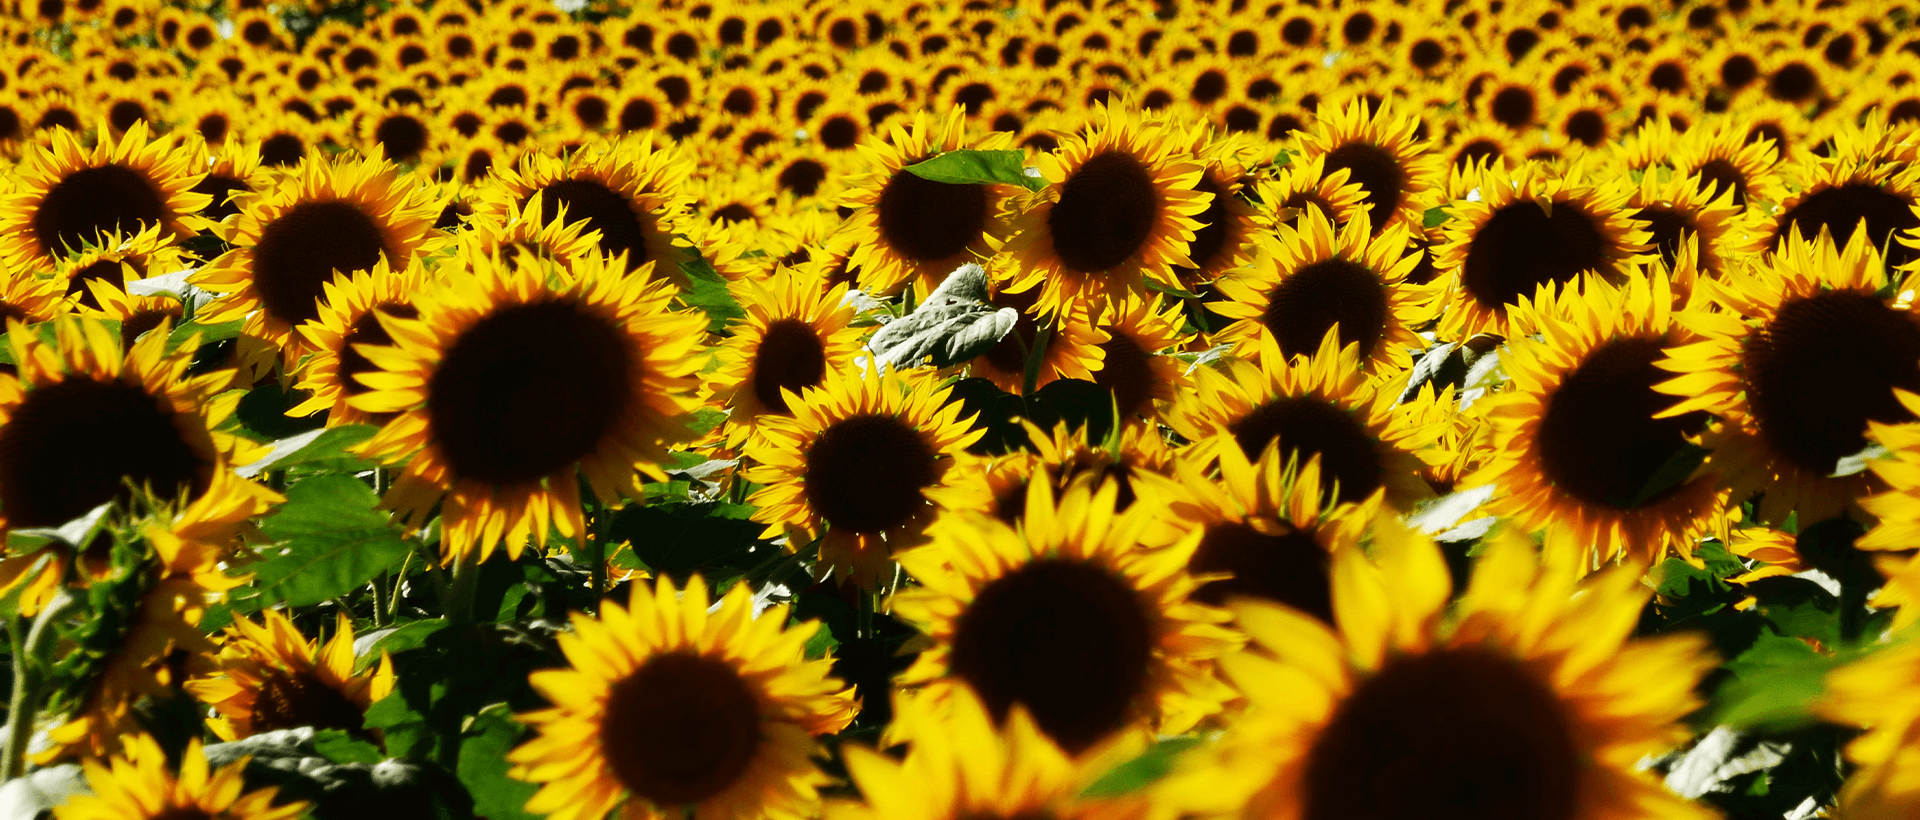 a large field of yellow sunflowers with green leaves.